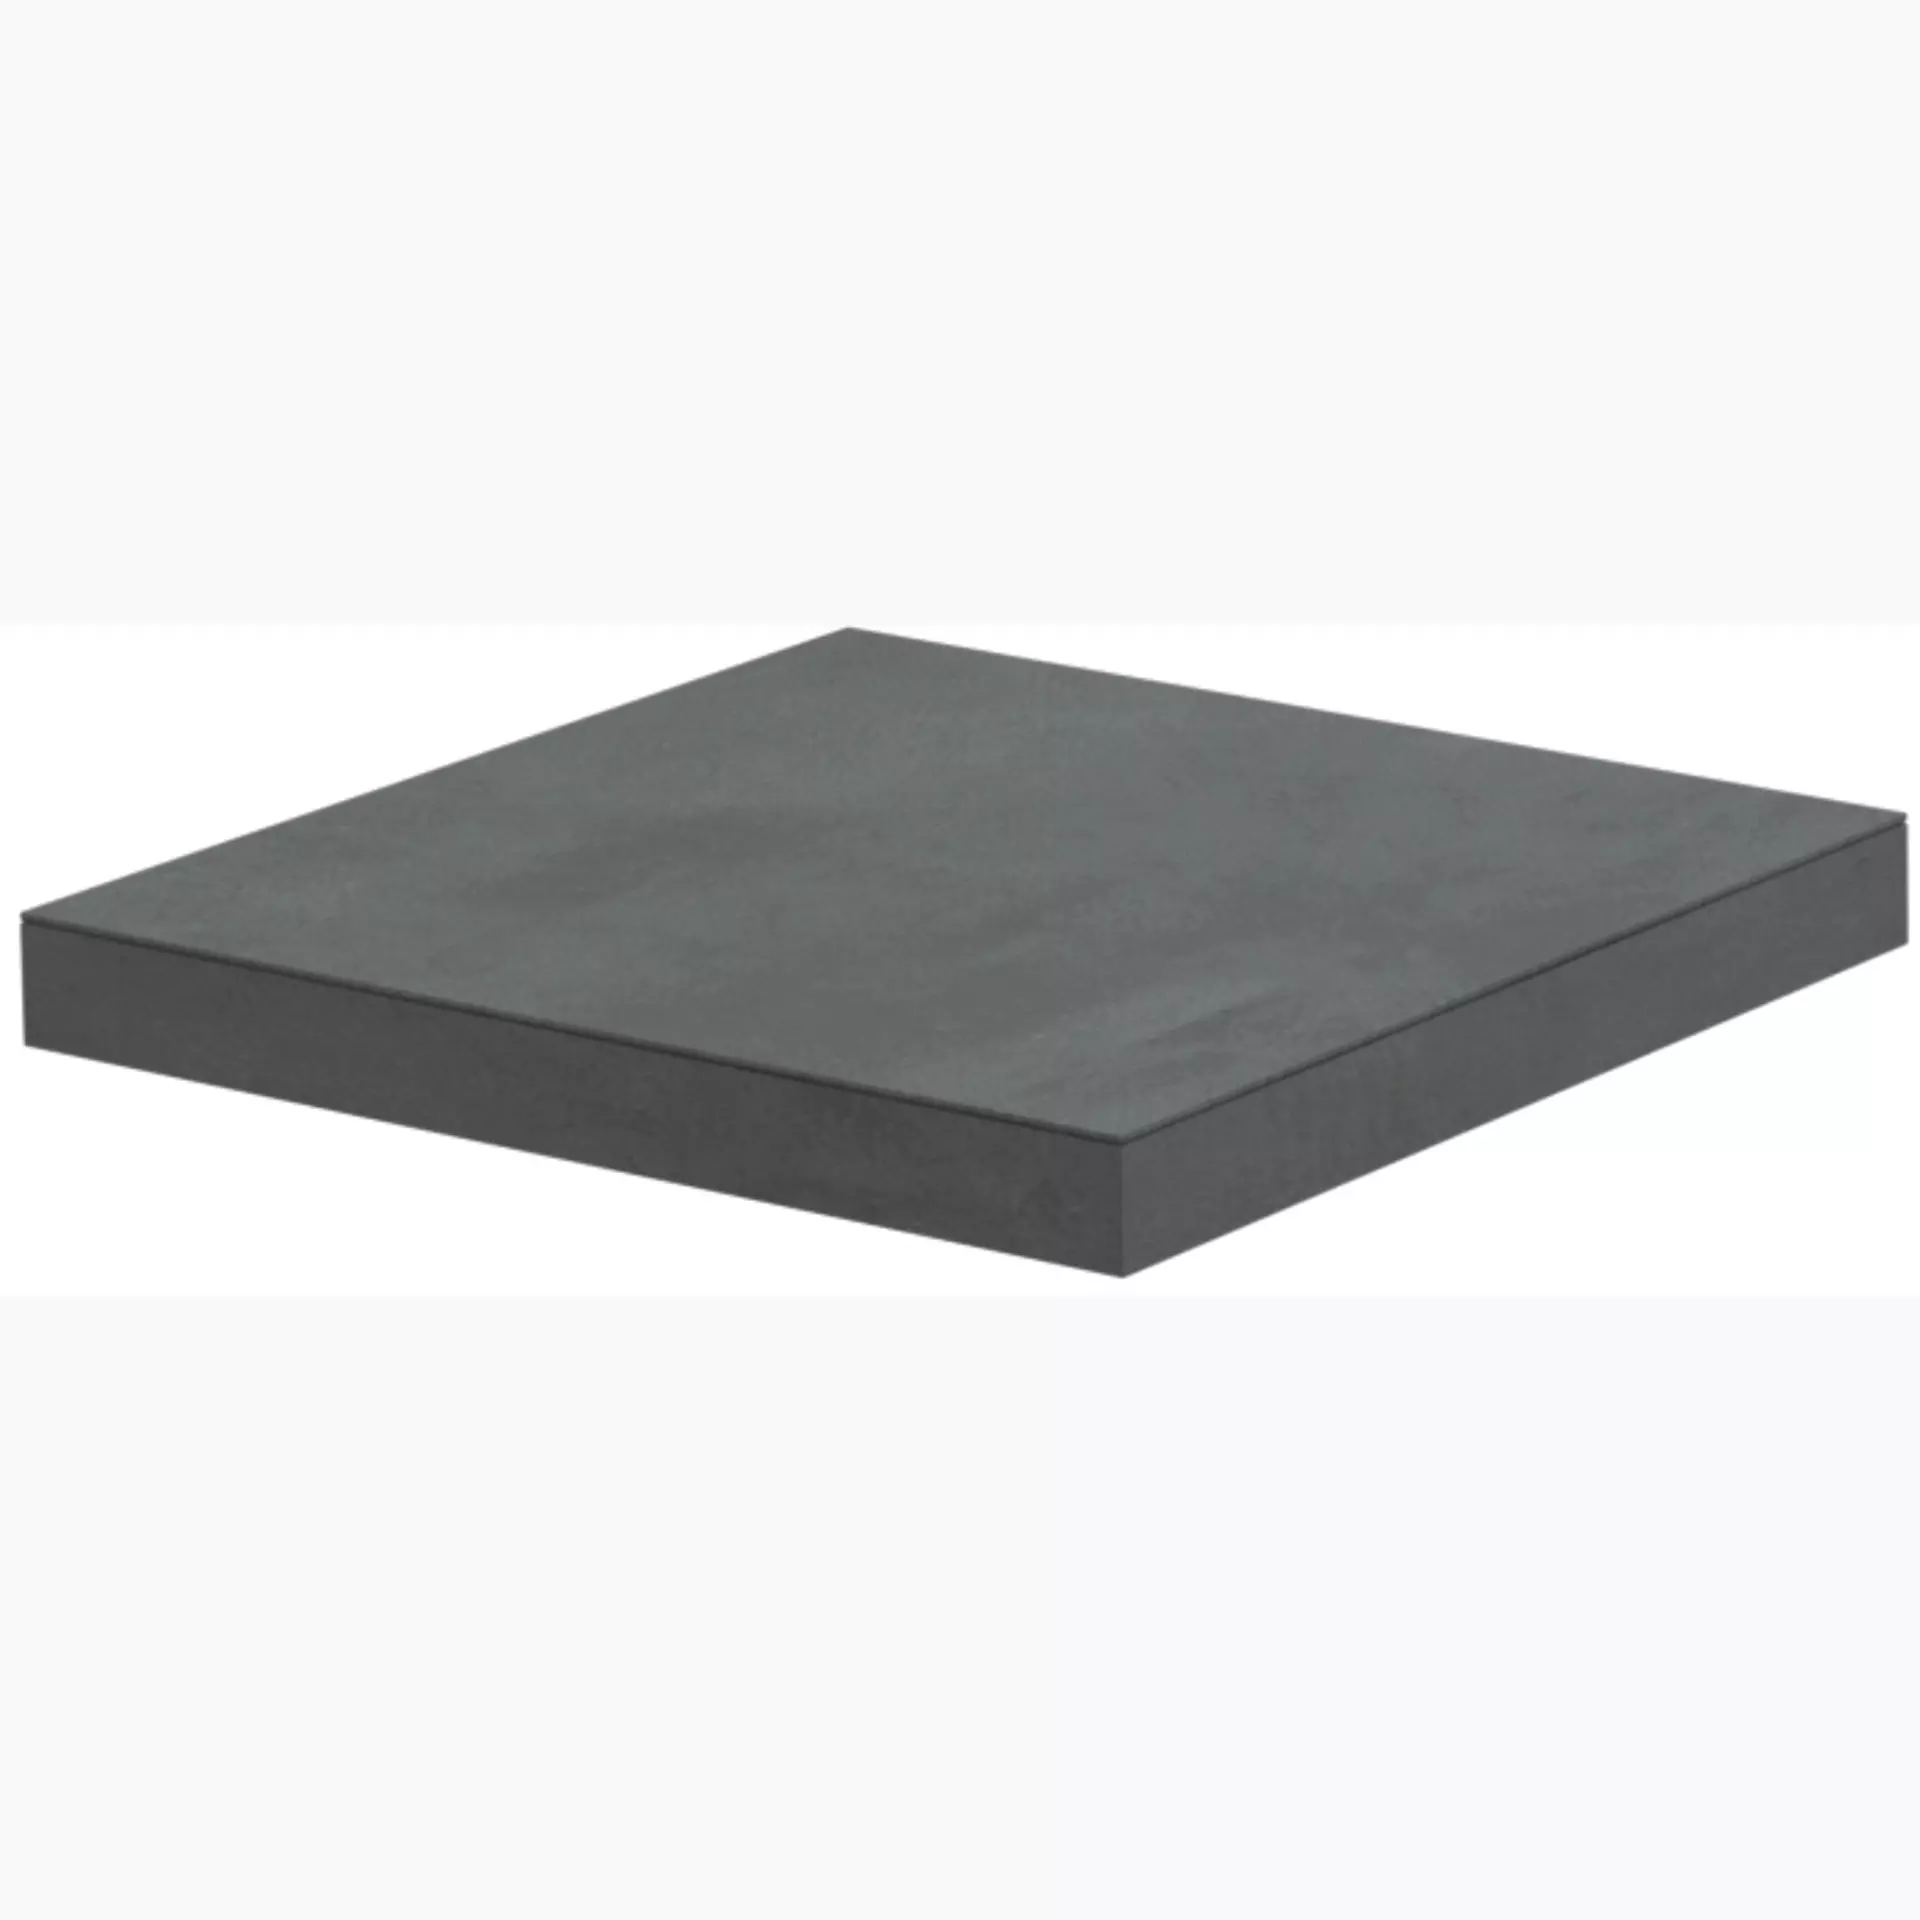 Del Conca Htl Timeline Nightfall Htl02 Naturale Corner plate Step Left G3TL02RGS 33x33cm rectified 8,5mm